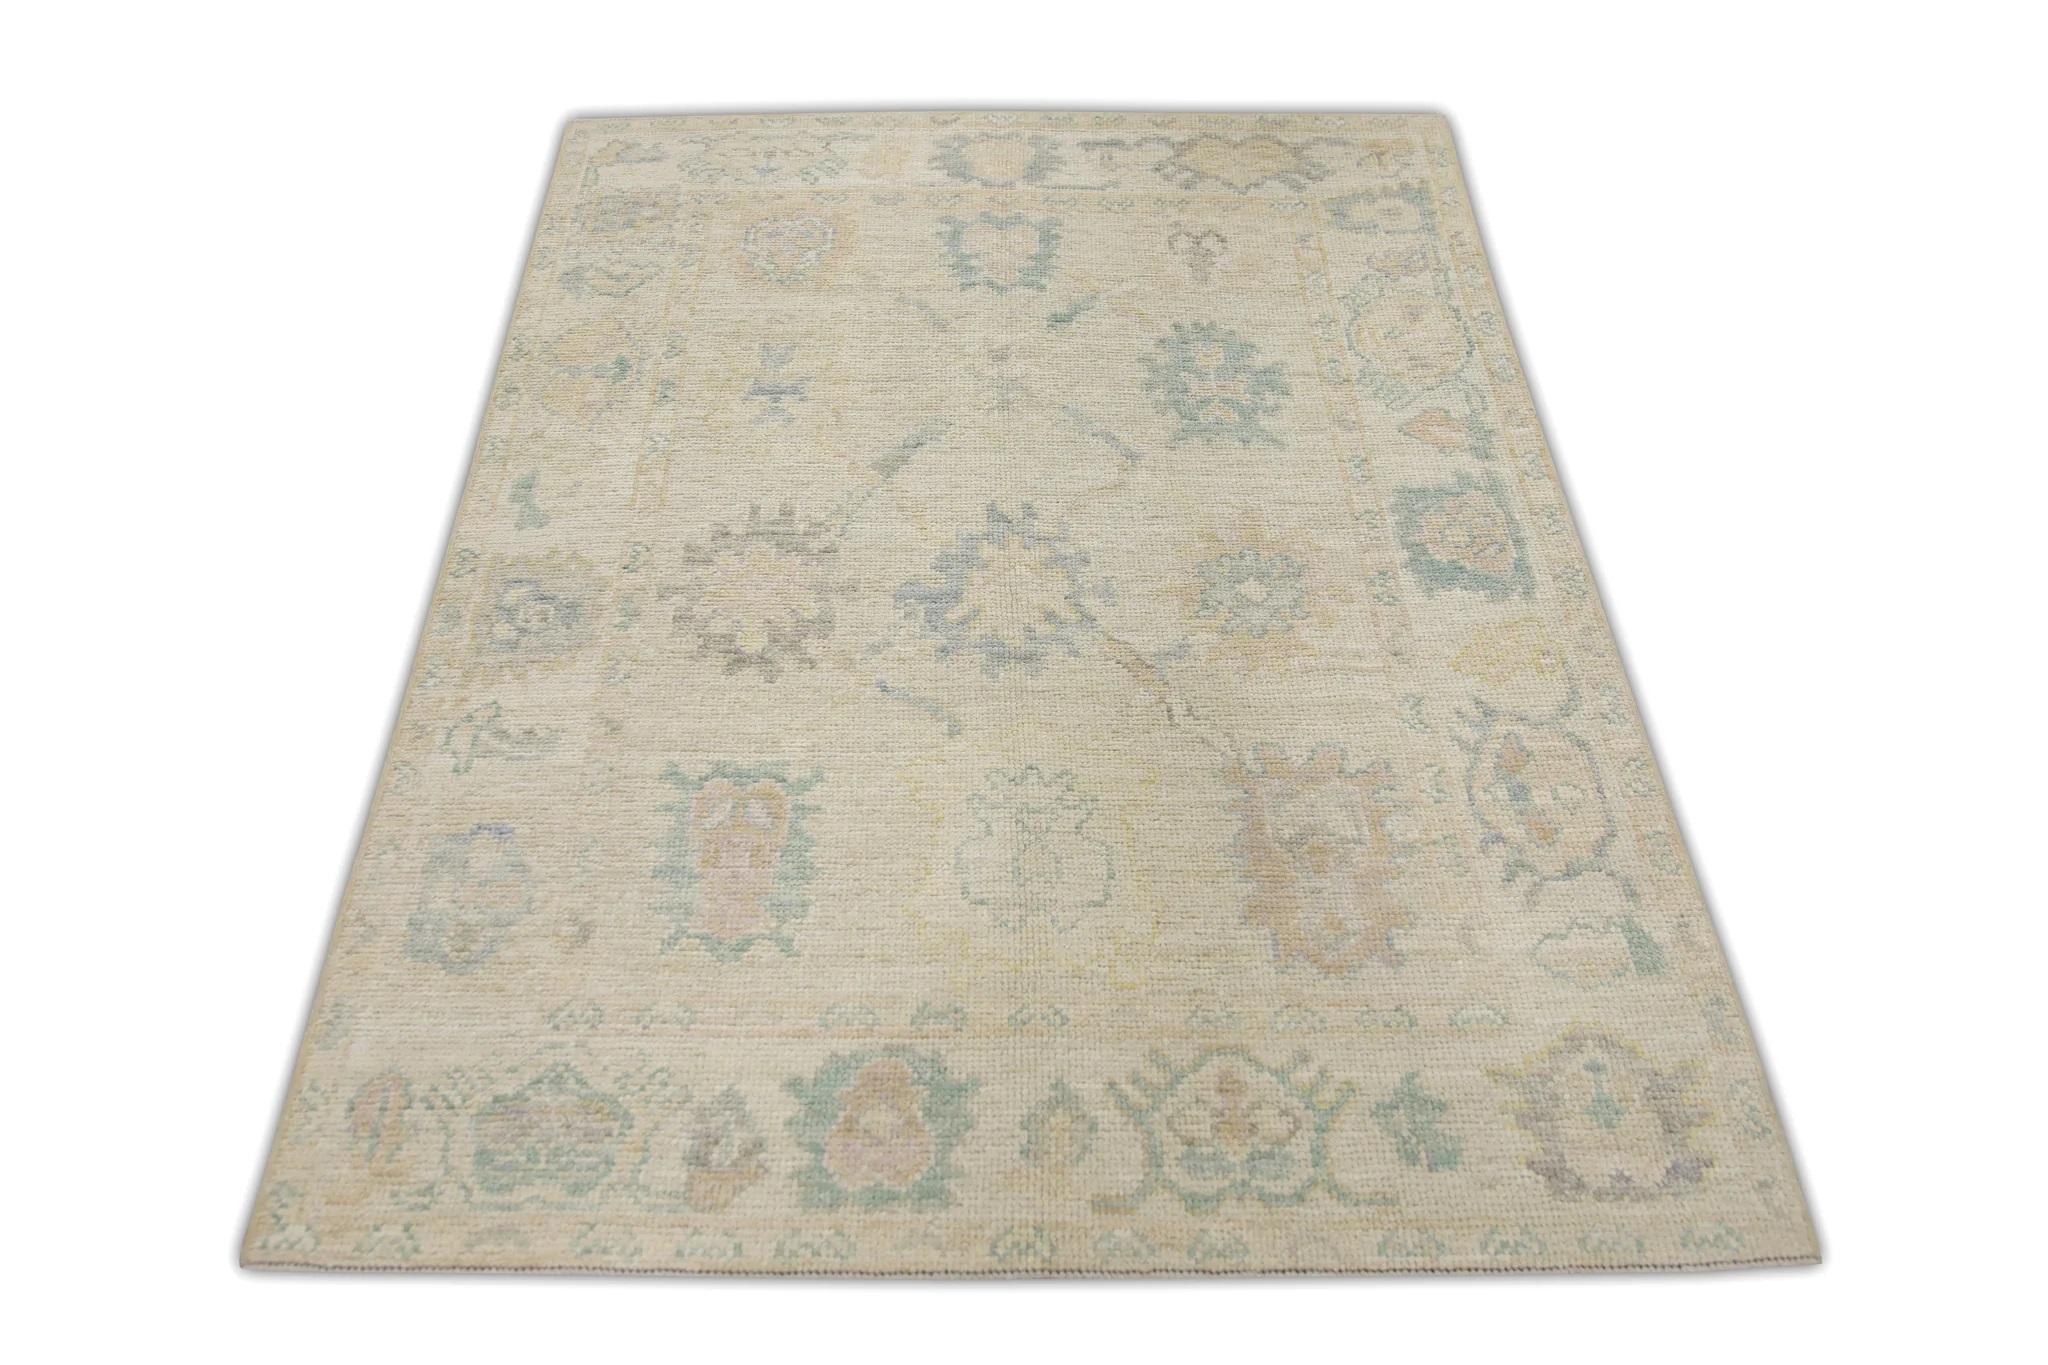 Multicolor Handwoven Wool Turkish Oushak Rug in Floral Design 4' x 5'9